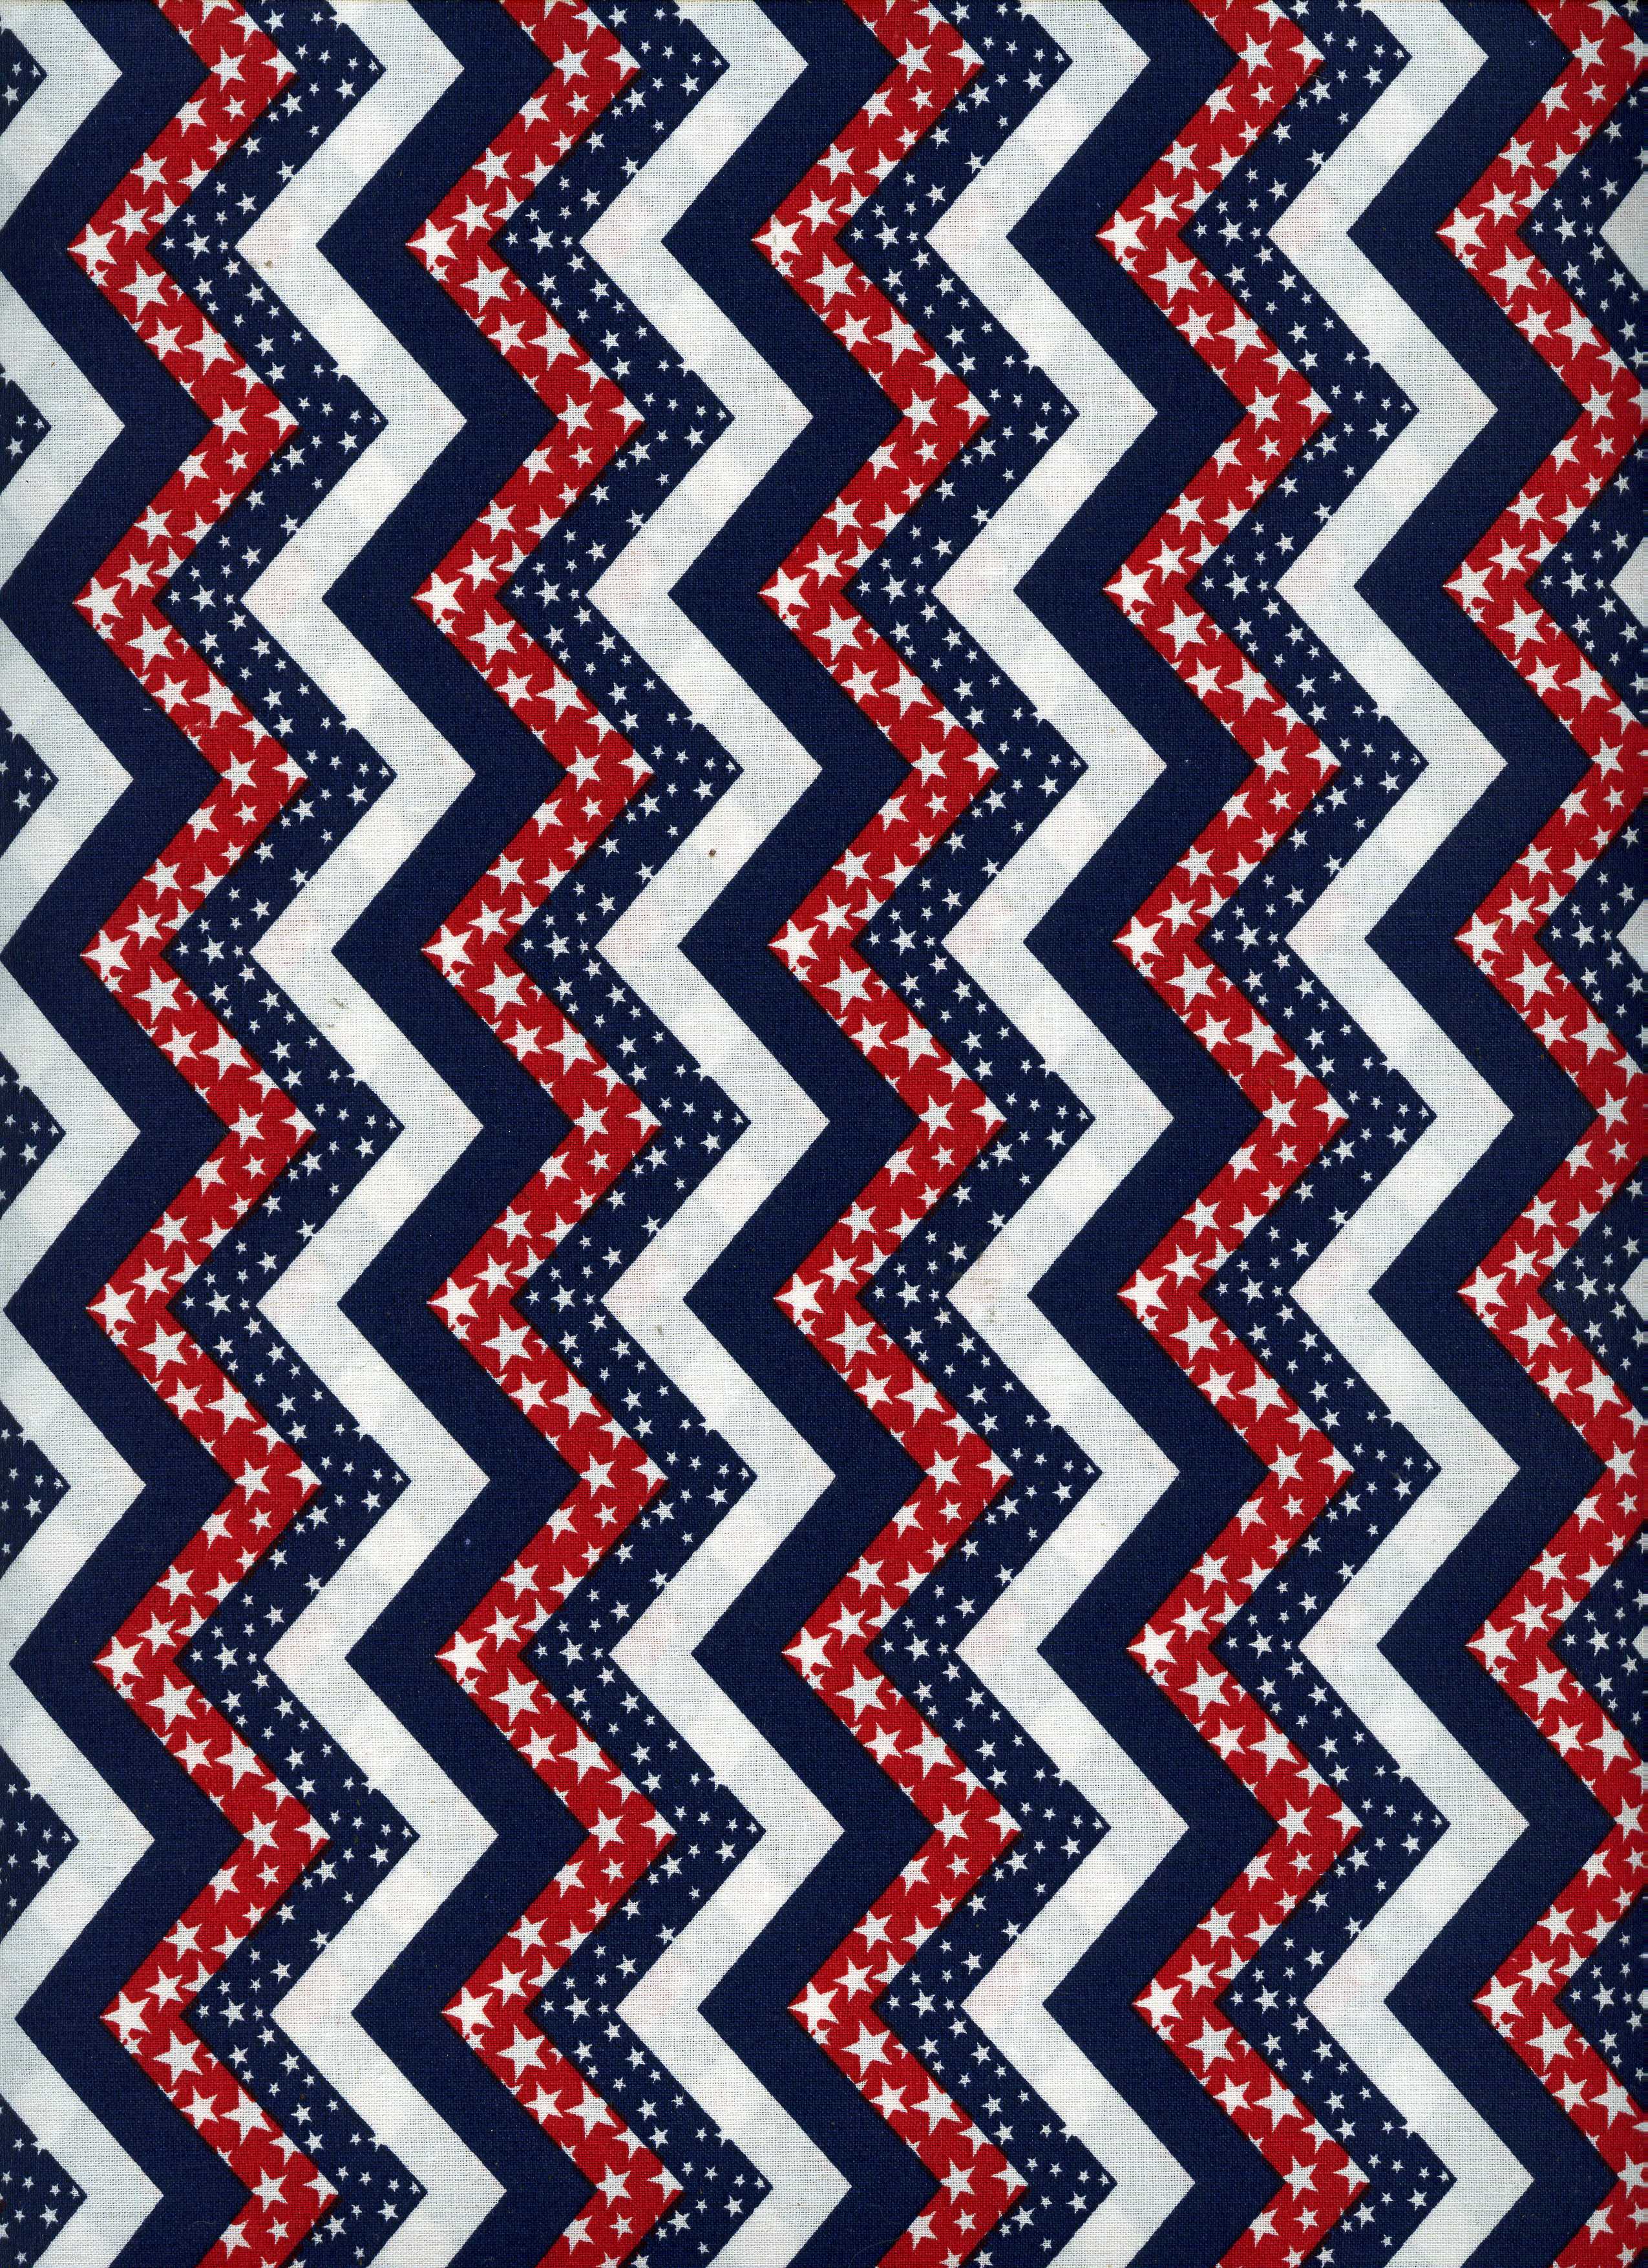 Red white and blue print